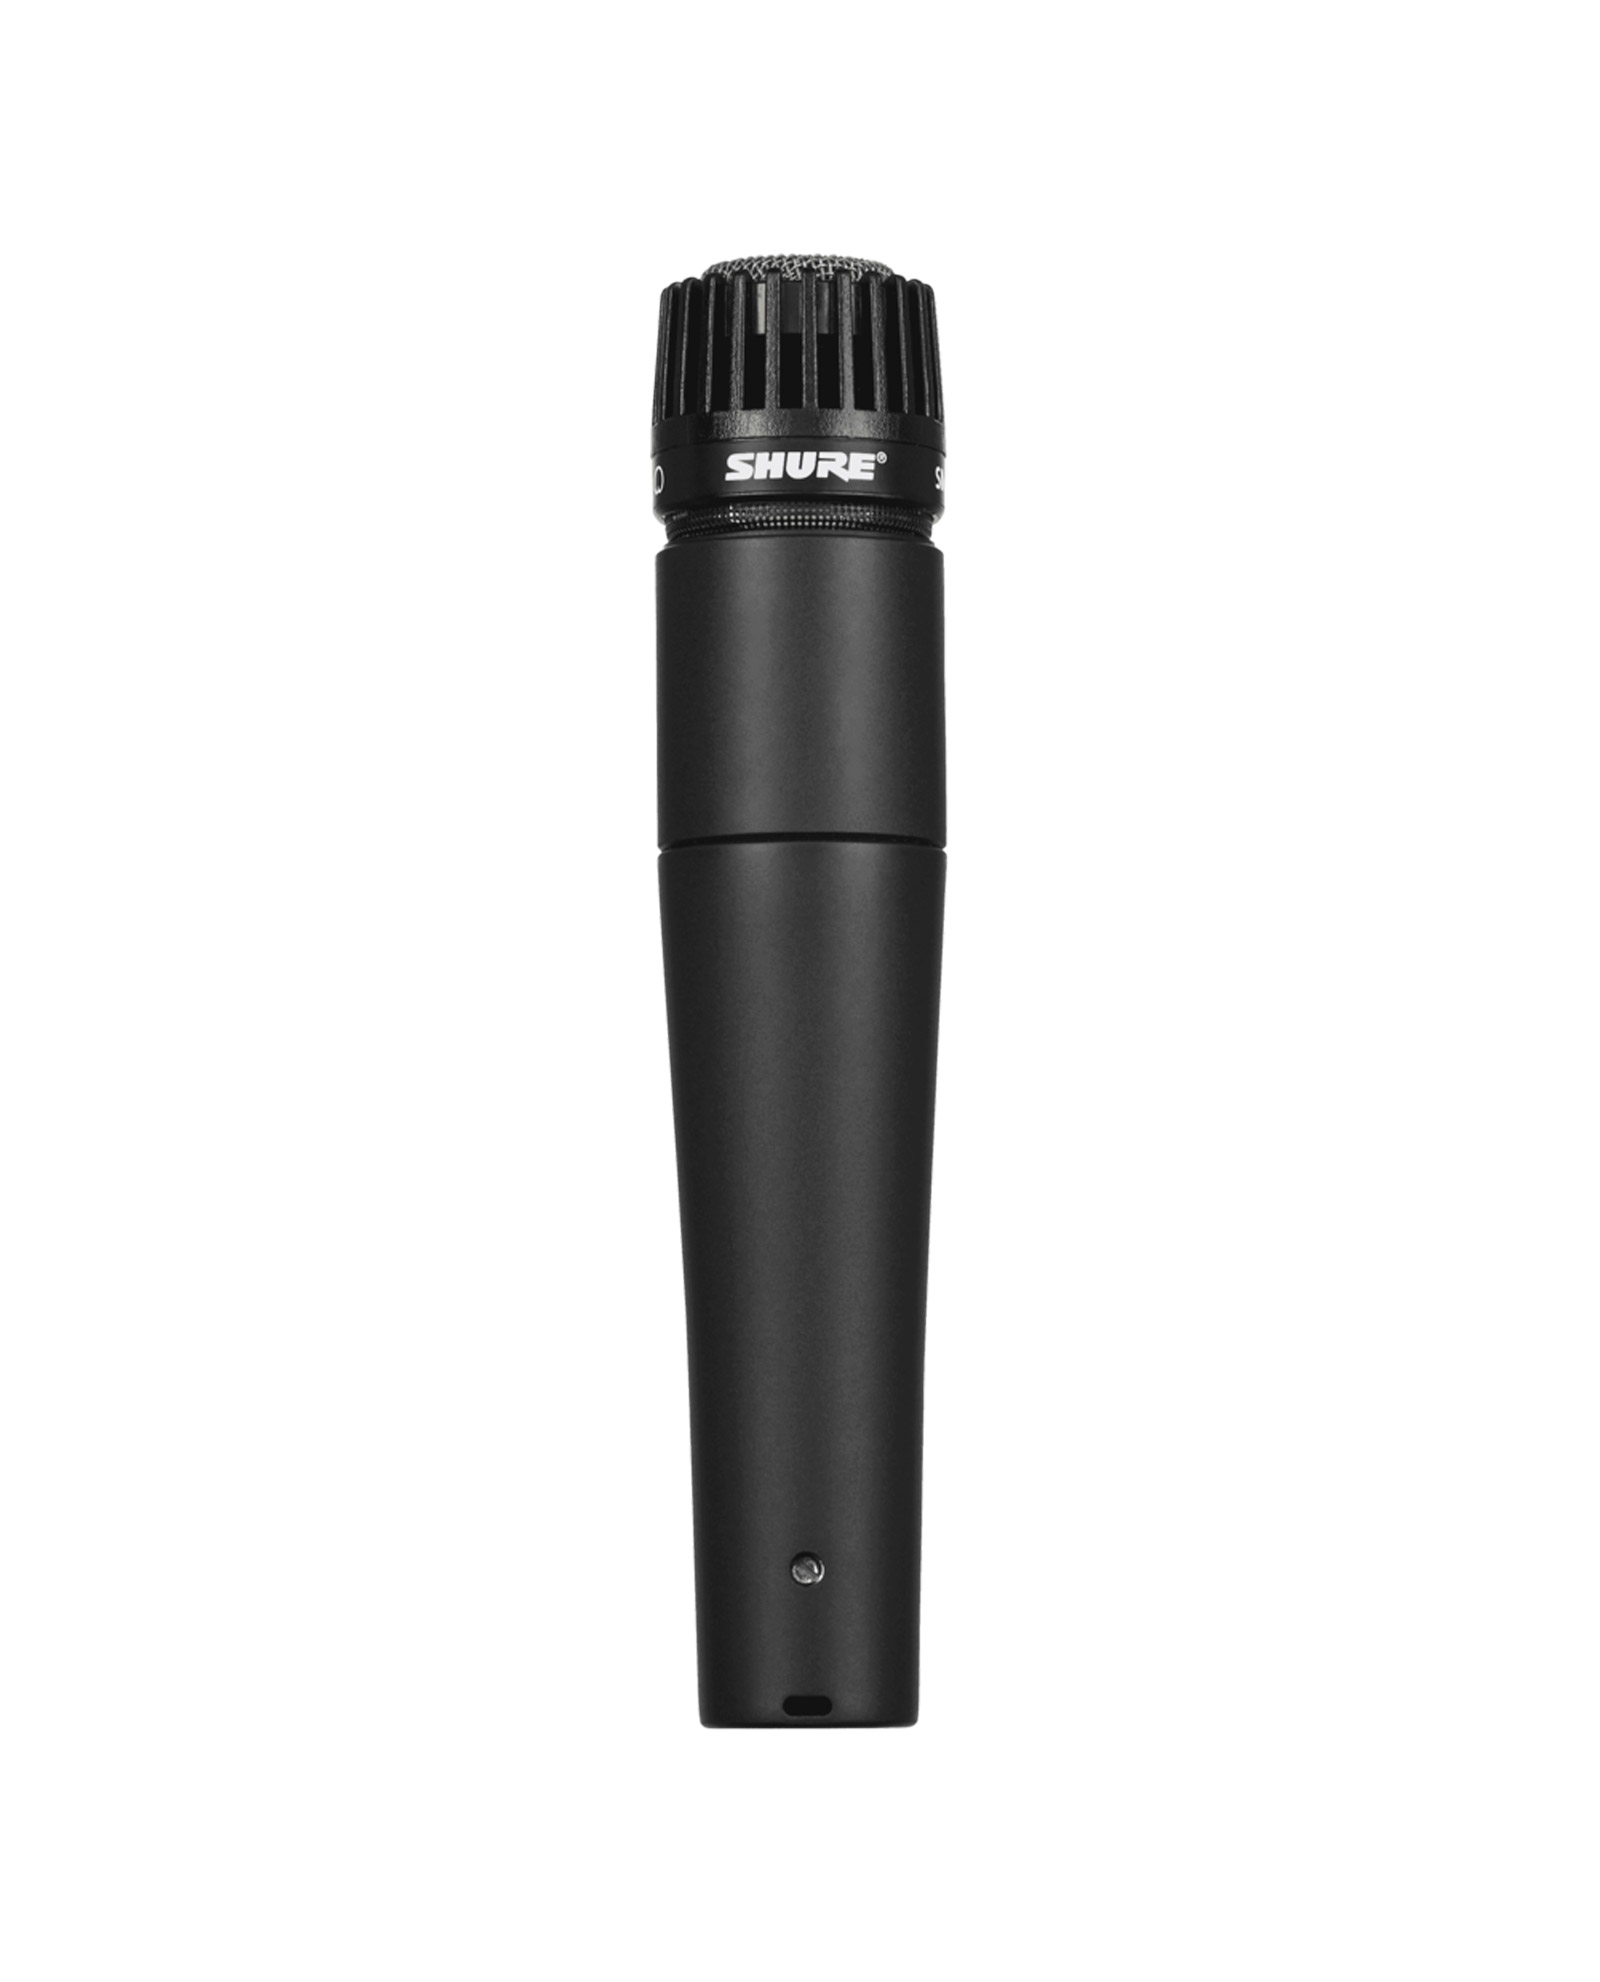 Shure Sm57 Instrument Microphone